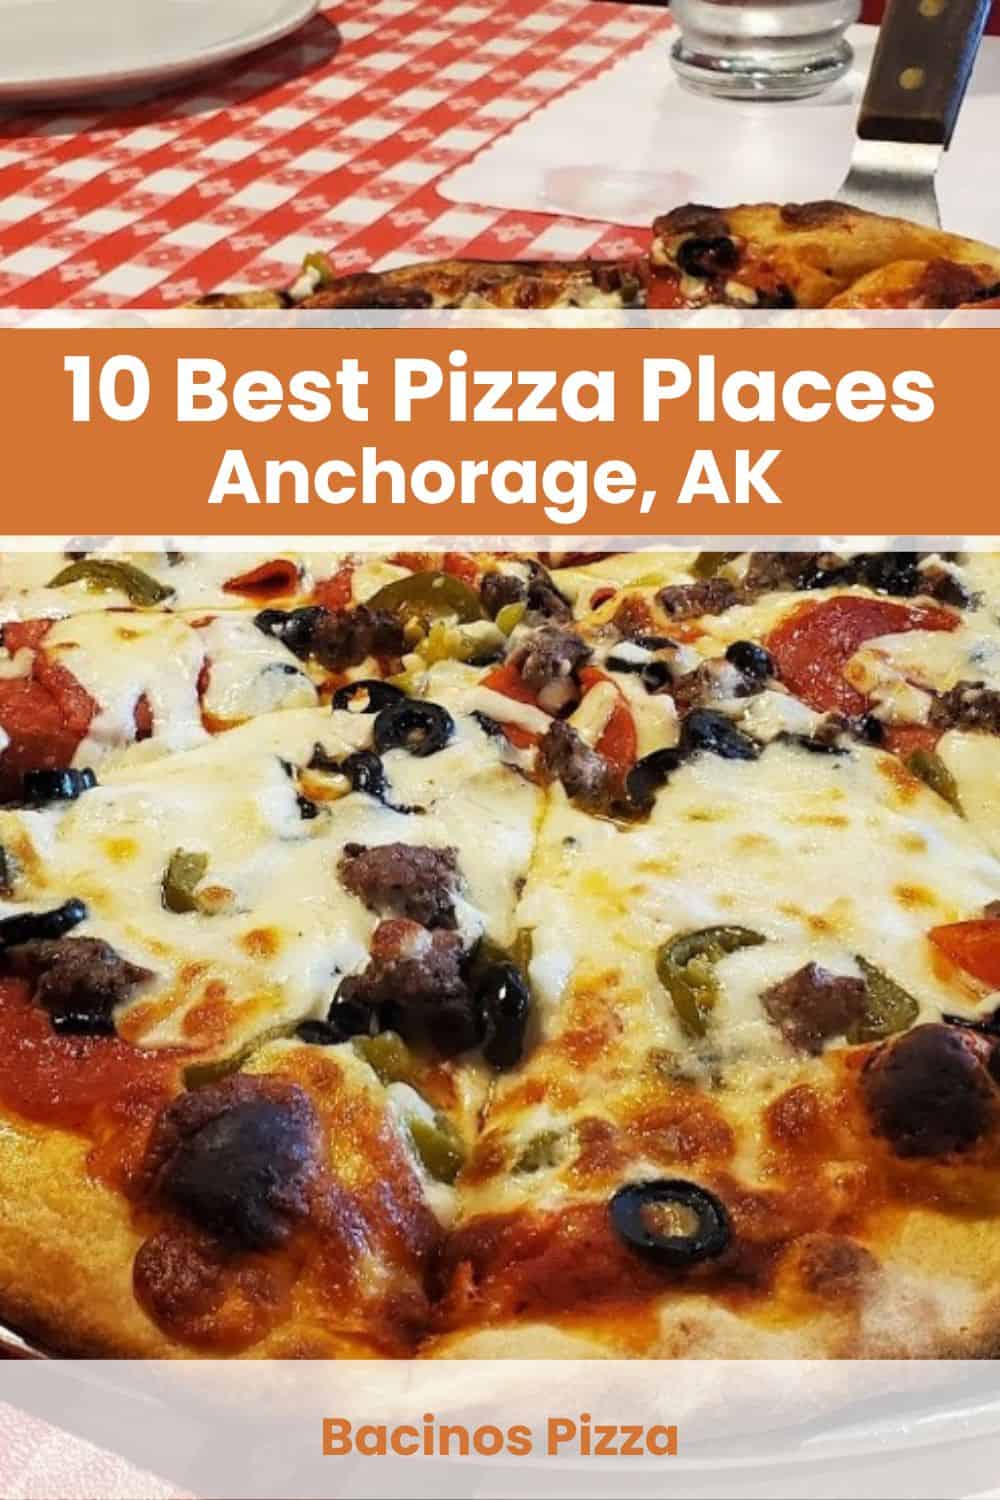 Pizza in Anchorage